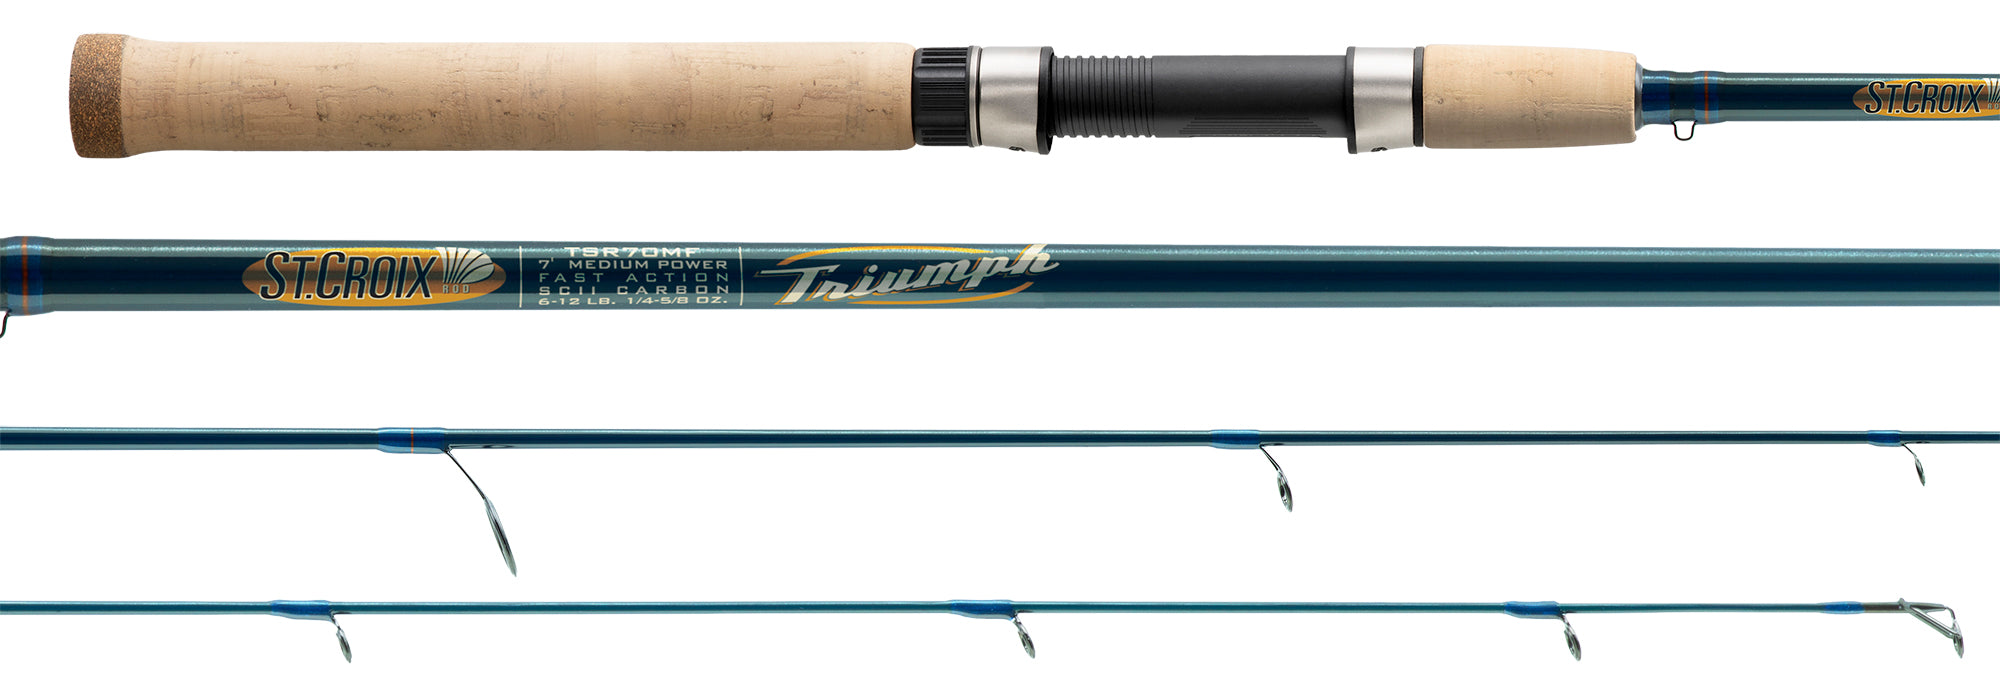 St Croix Physyx Spinning Rod